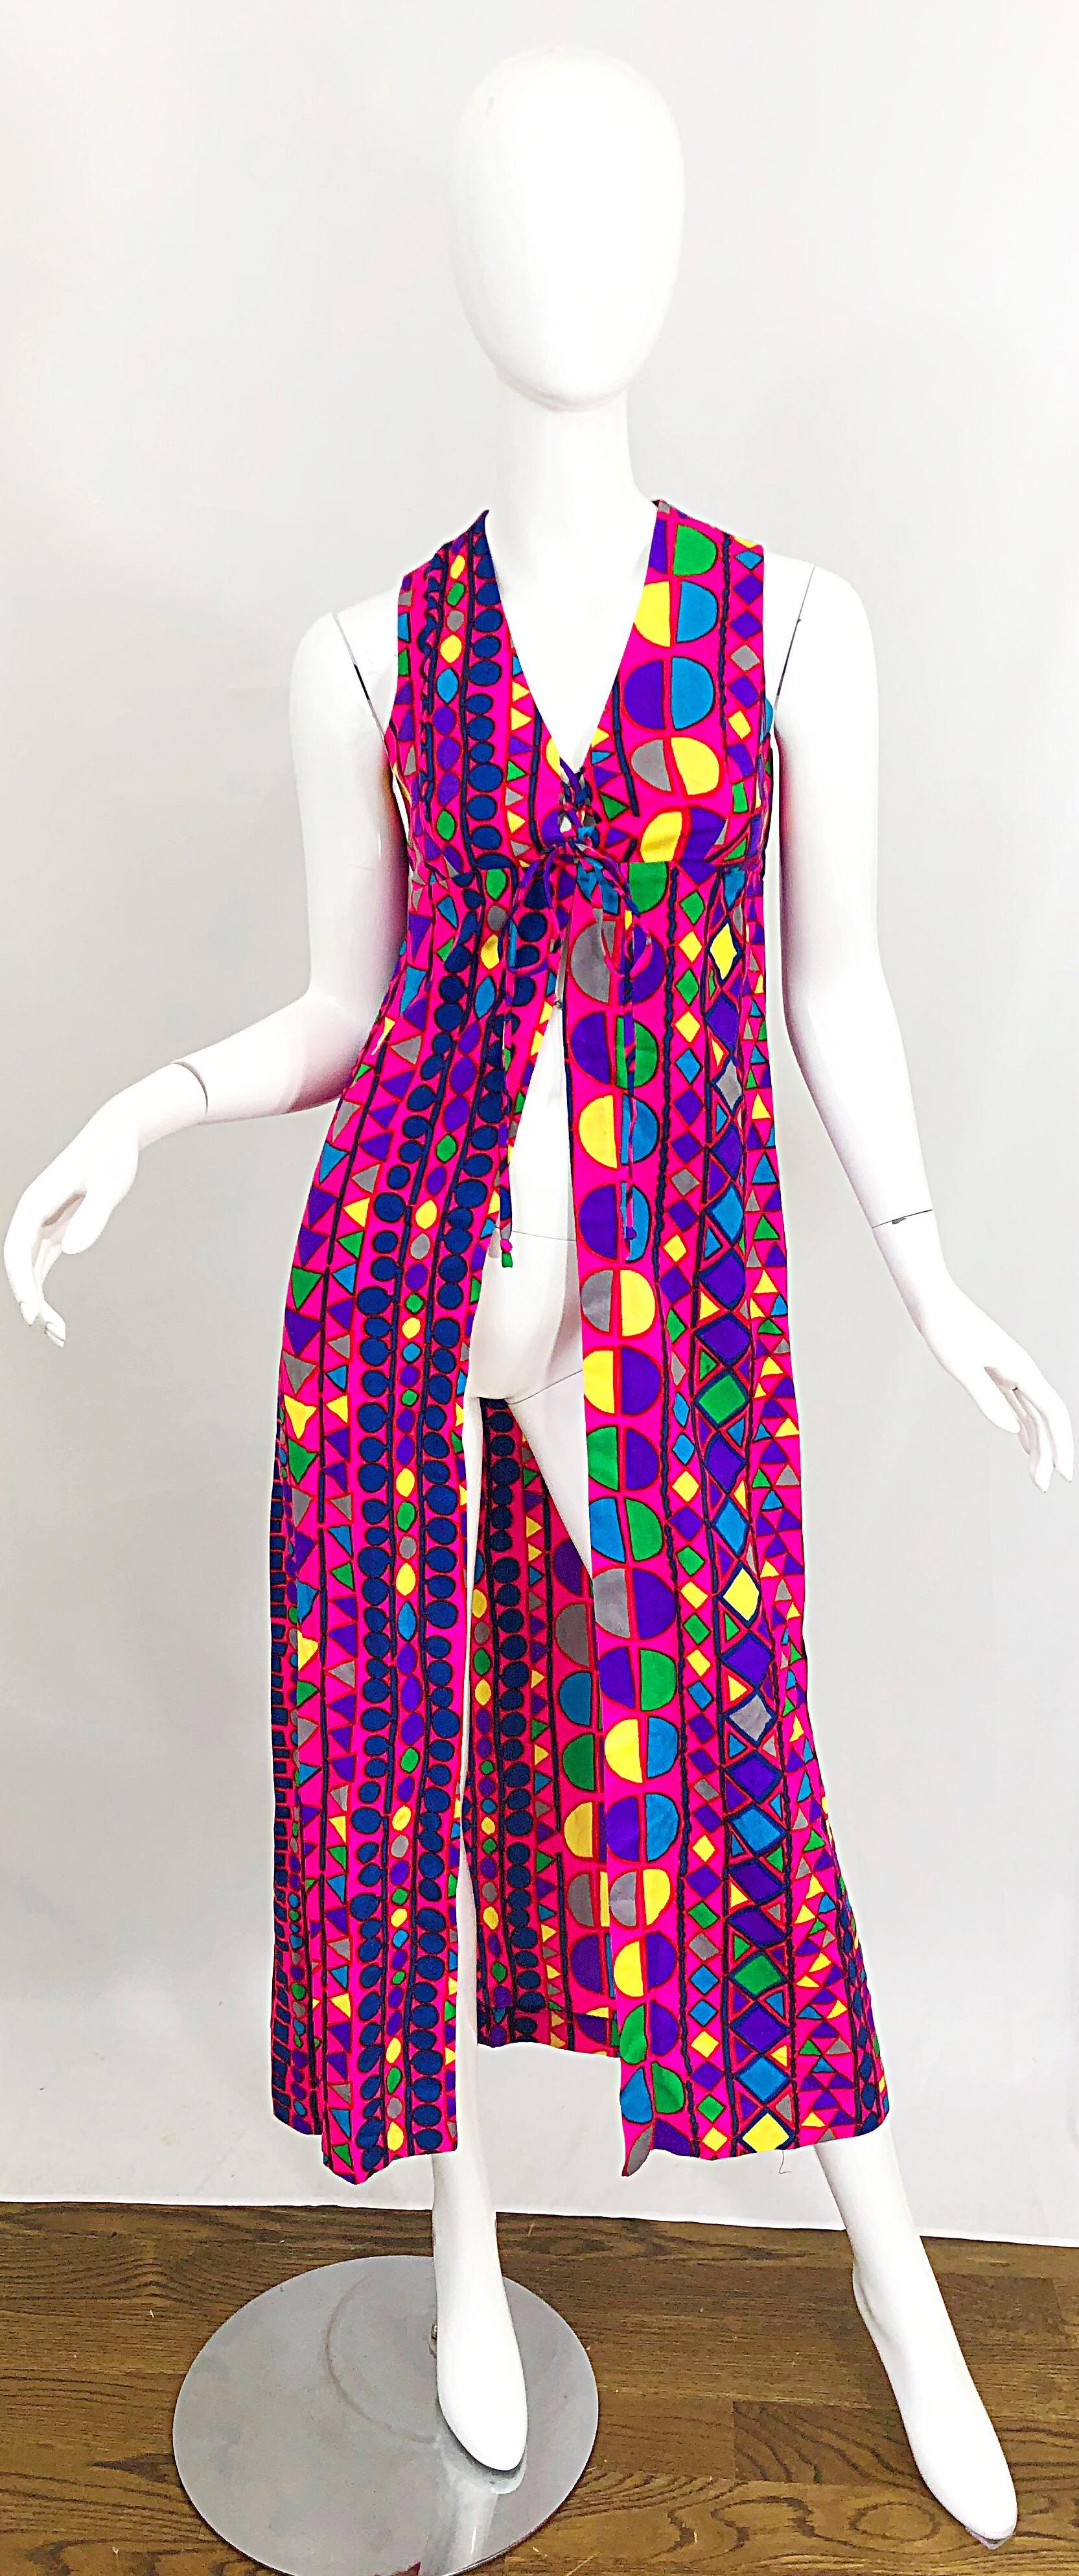 Amazing 1970s vintage JOSEPH MAGNIN vibrant colorful abstract mosaic sleeveless vest / maxi dress! Features bright hot pink fuchsia, blue, purple, green, yellow, and grey throughout. Laces up the front can adjust size. Elastic band in back also